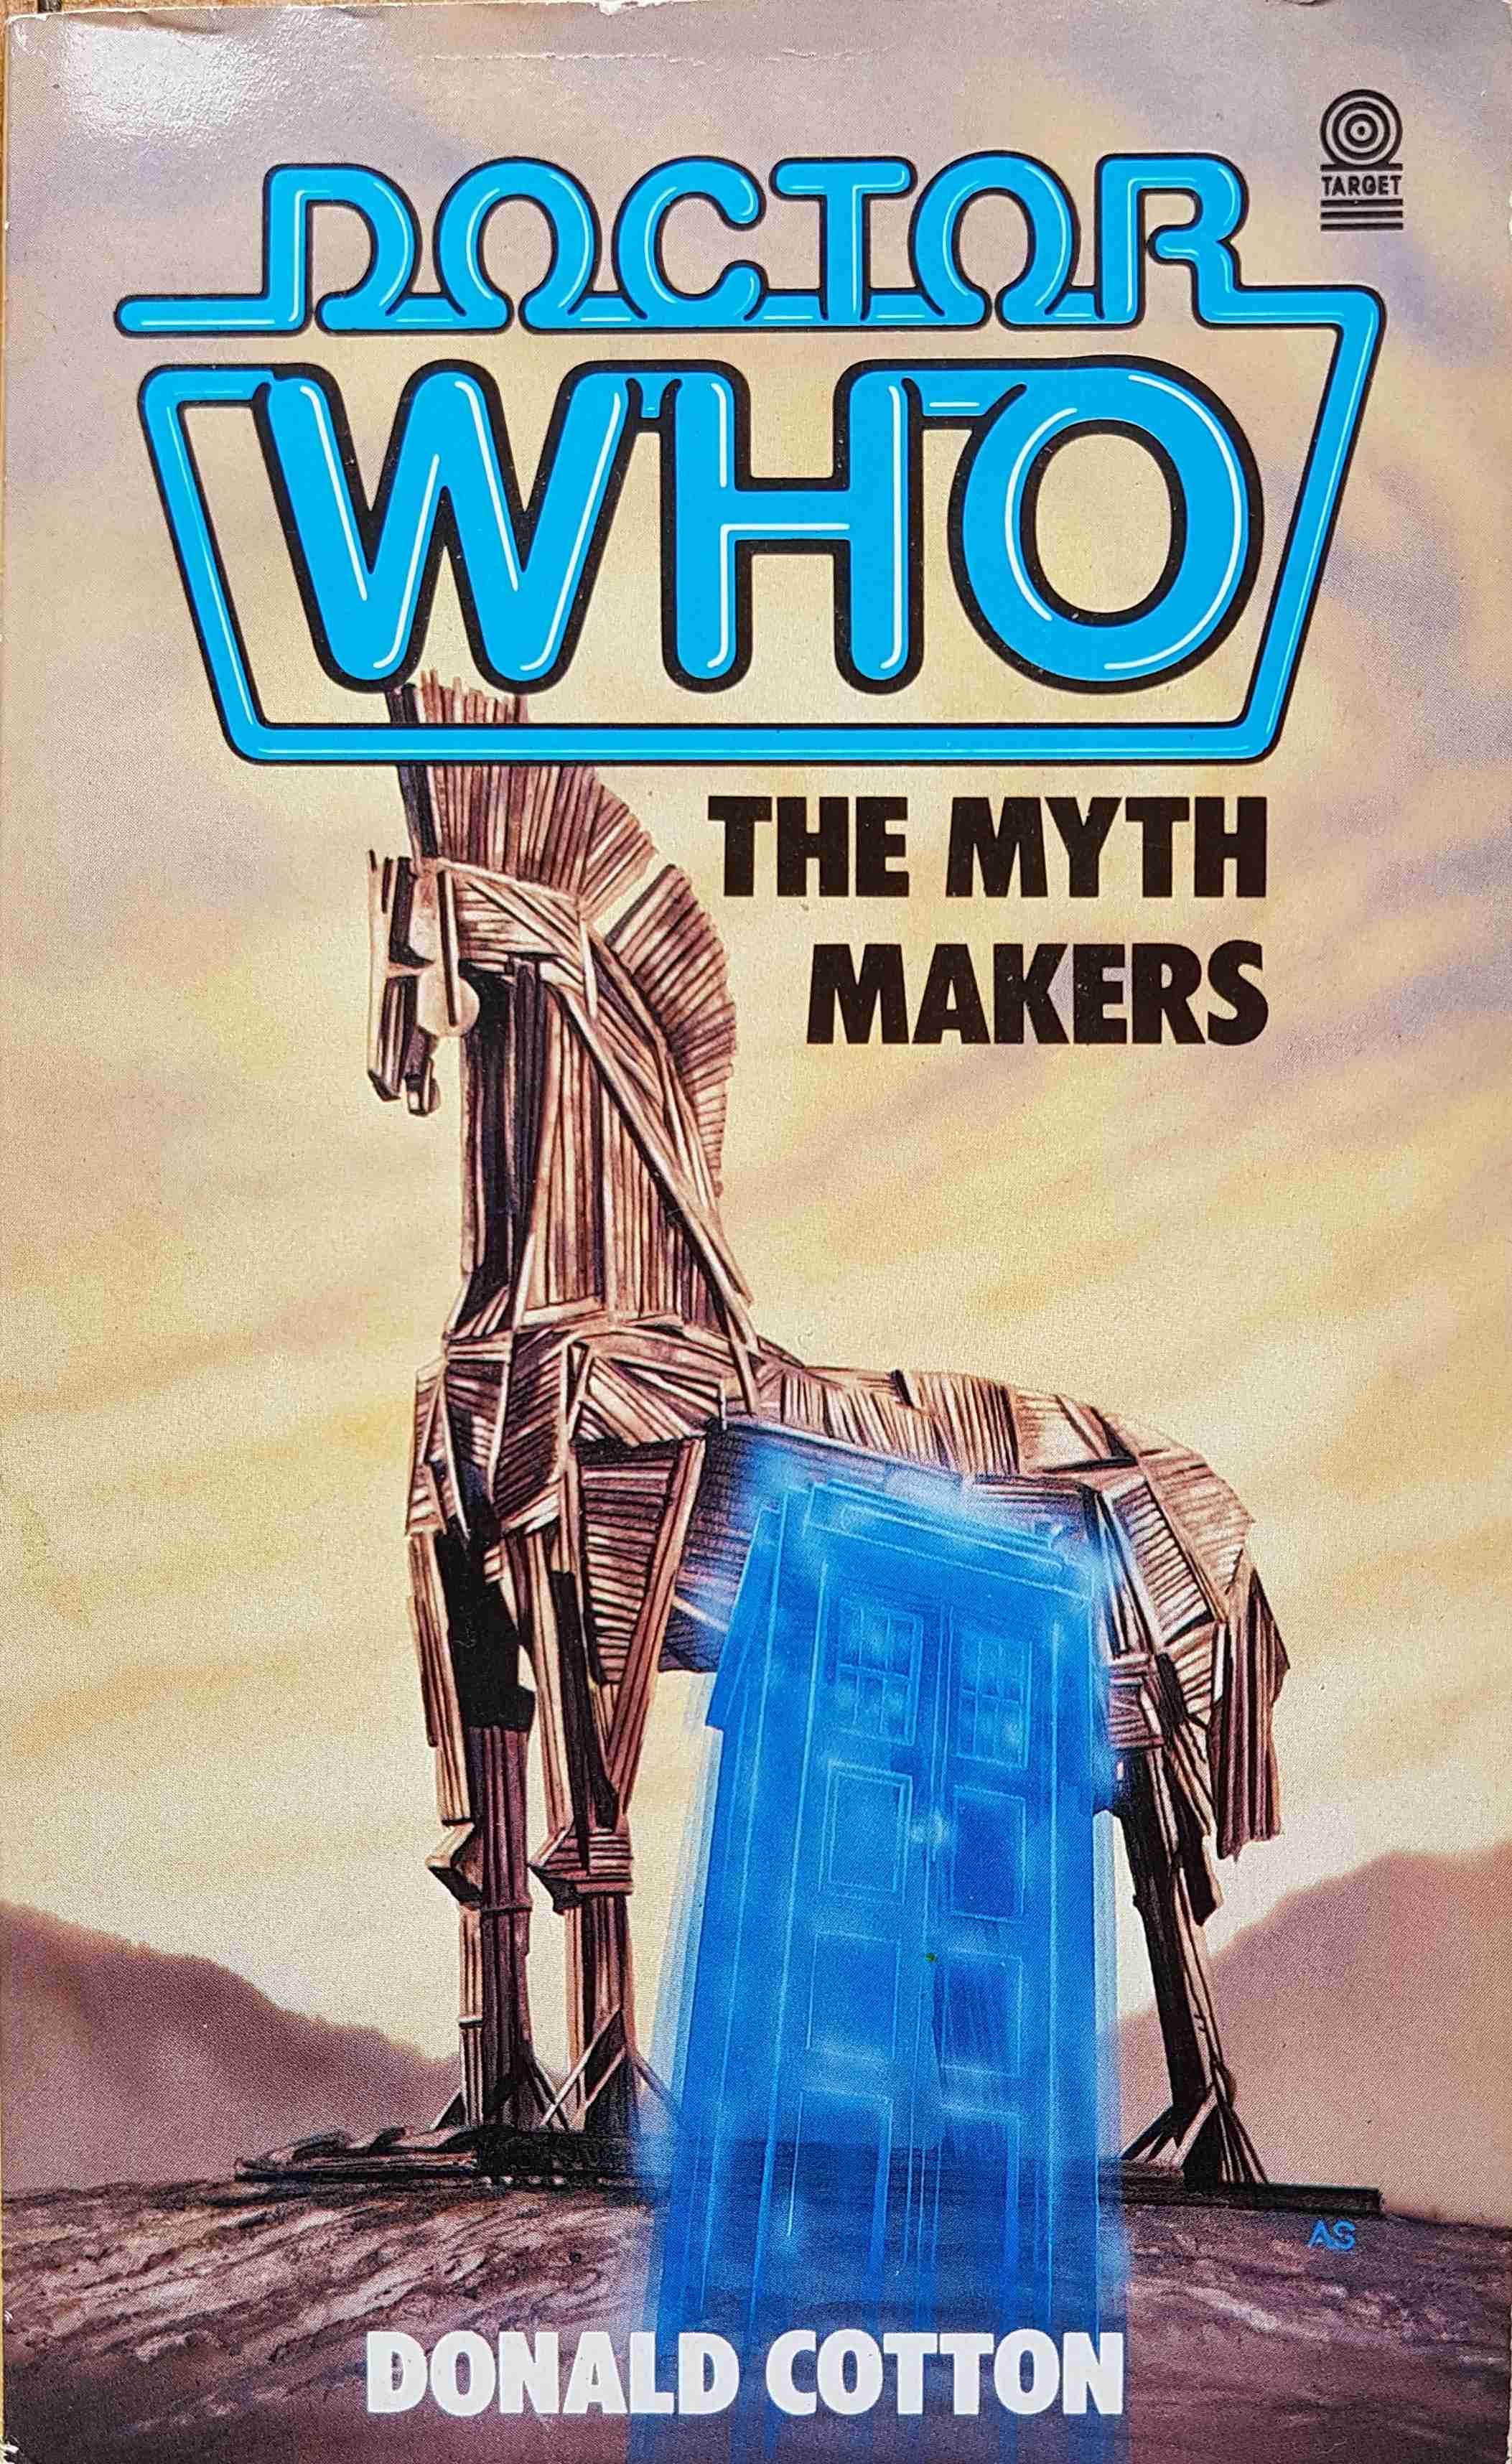 Picture of 0-426-20170-1 Doctor Who - The myth makers by artist Donald Cotton from the BBC records and Tapes library